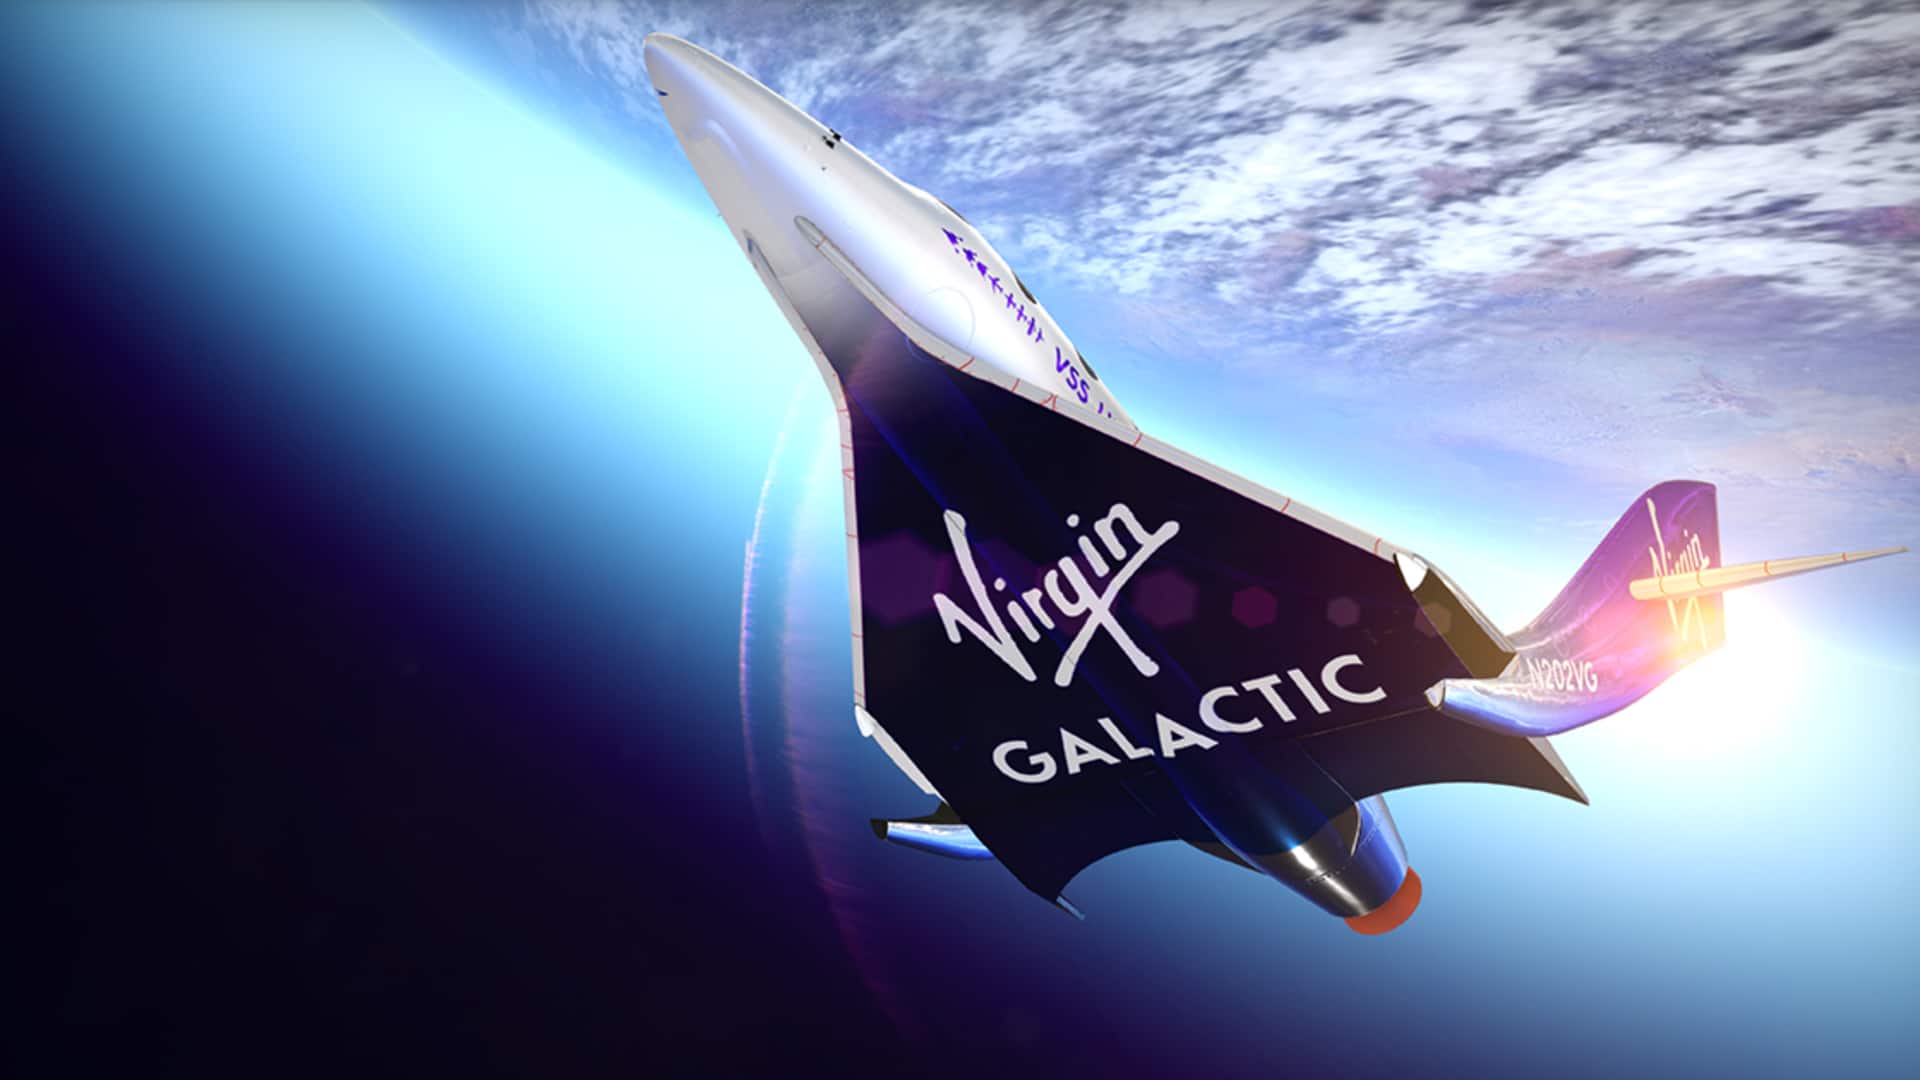 All about Virgin Galactic's fourth commercial spaceflight in October